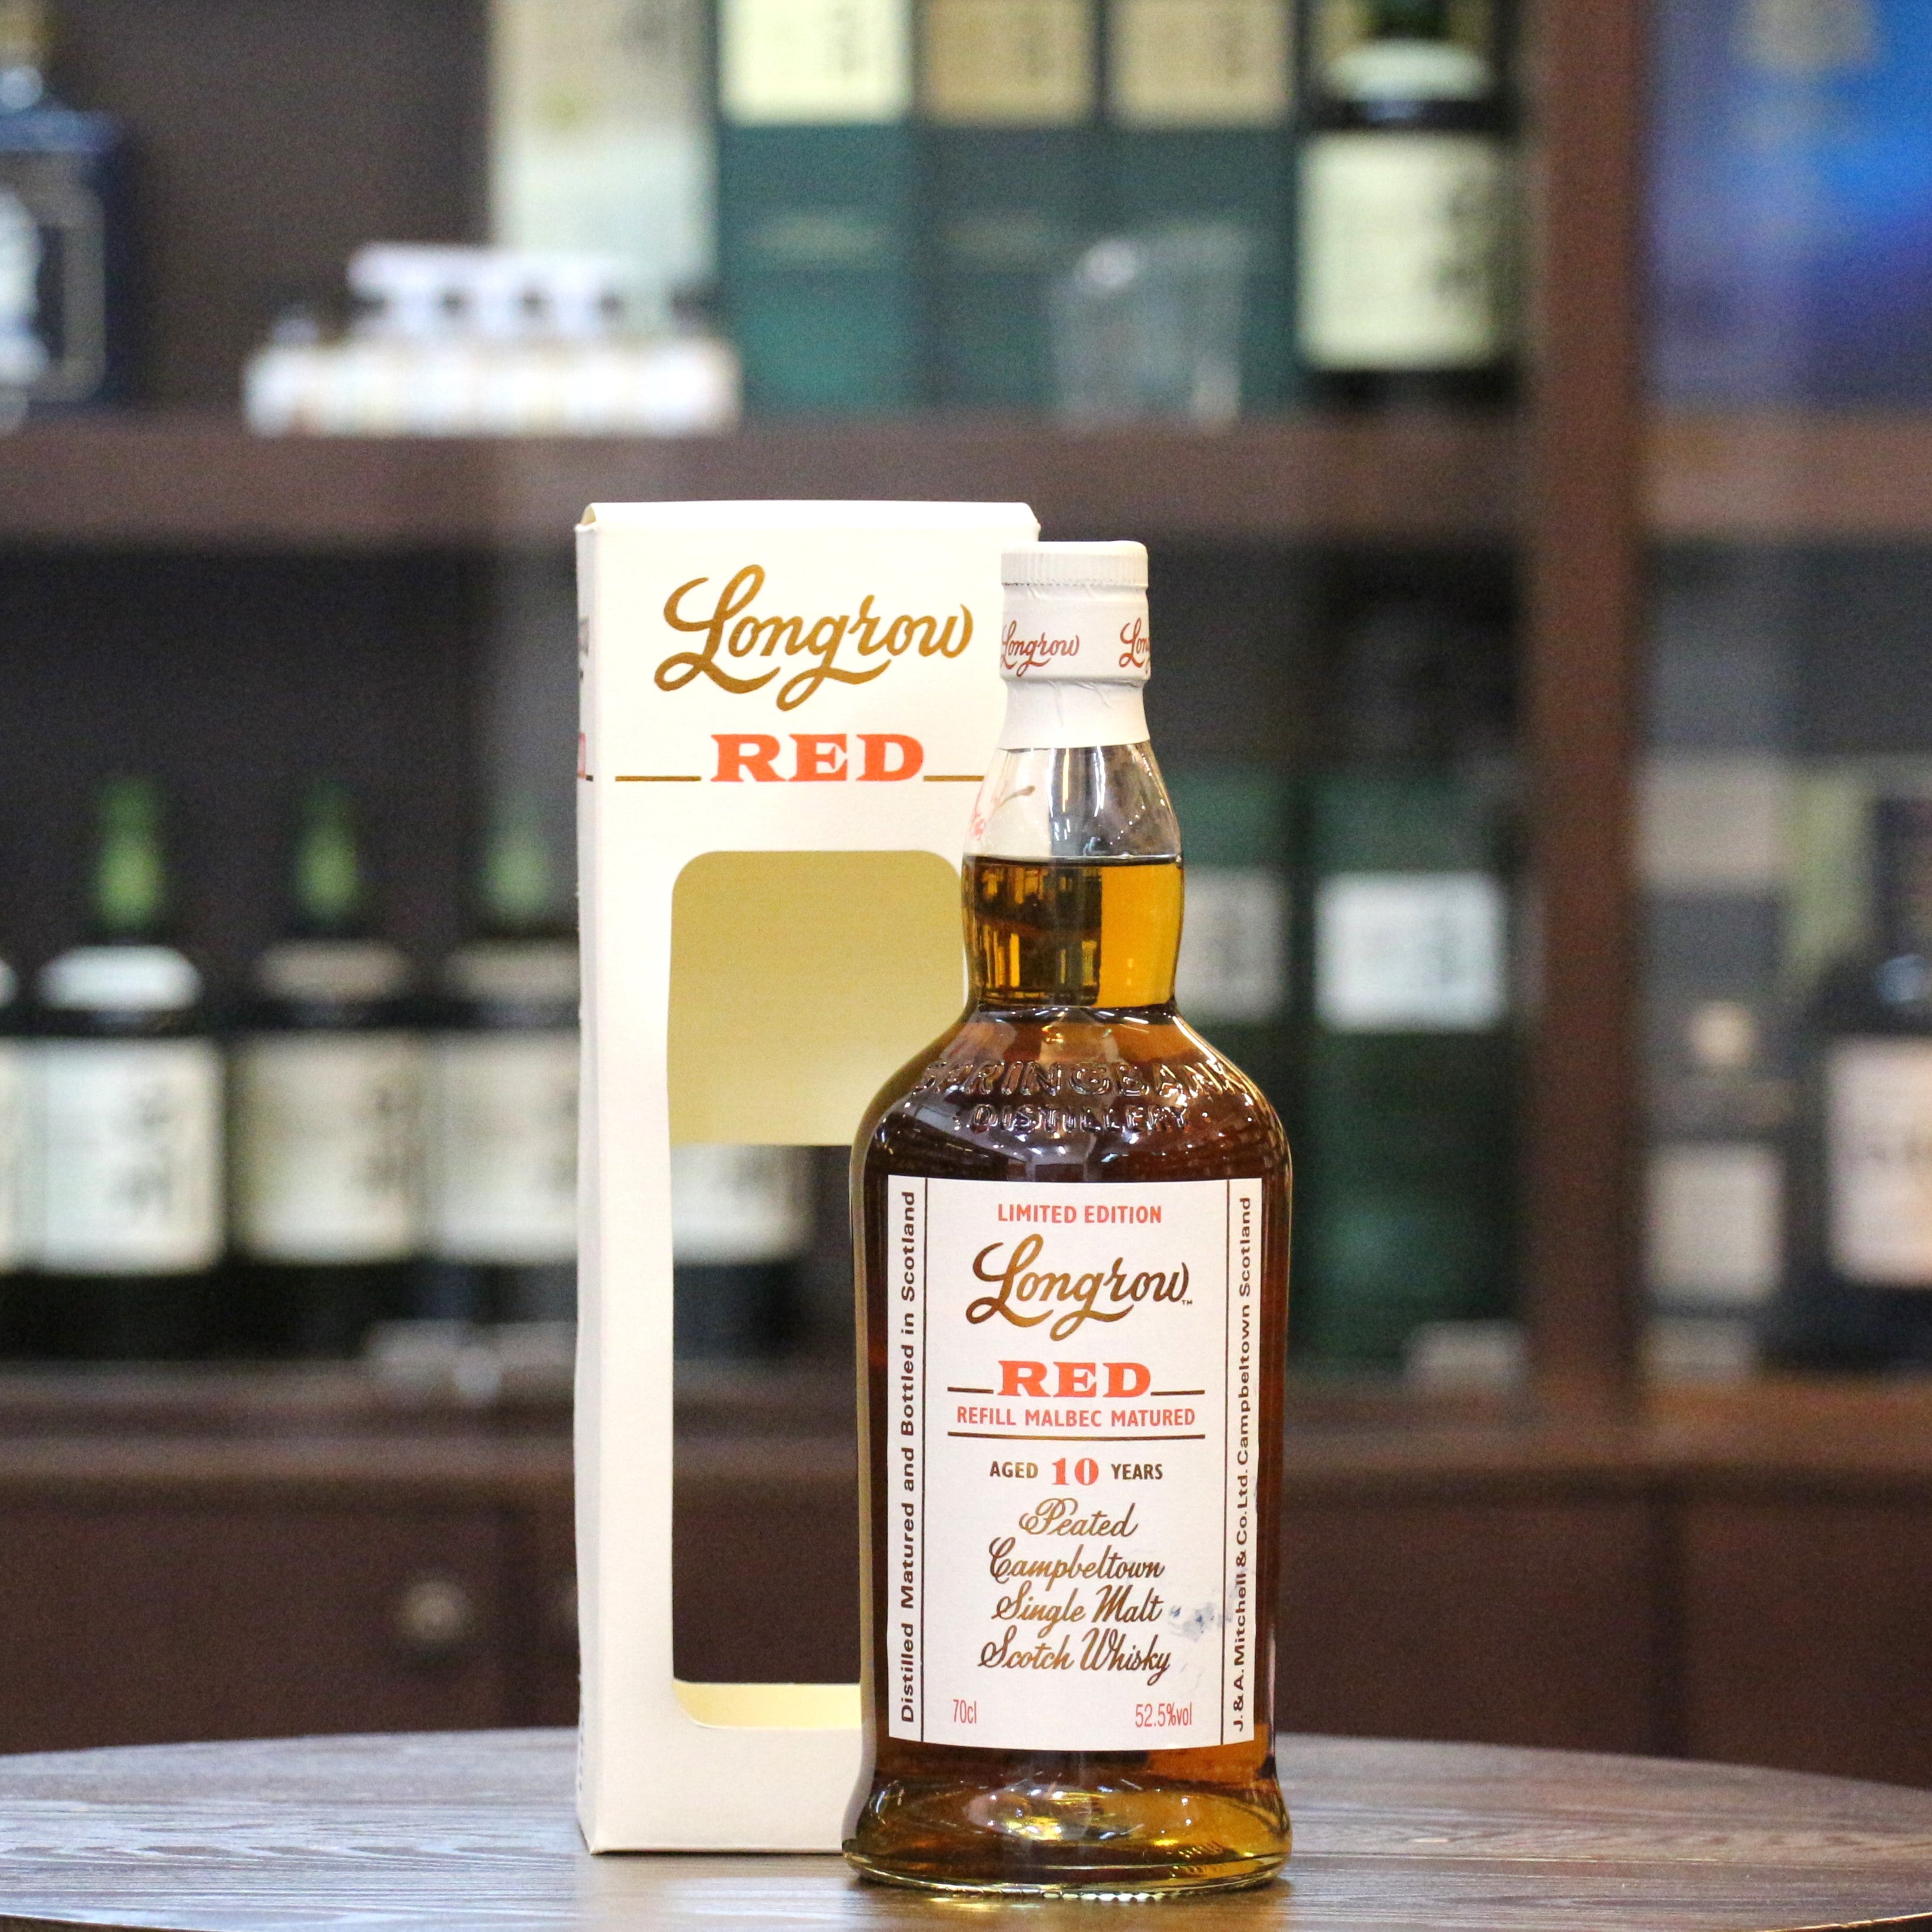 This Longrow "Red" Single Malt Scotch Whisky has been matured for 7 years in bourbon barrels followed by 3 years in refill Malbec barriques from the De Toren Private Cellar in Stellenbosch, South Africa. 10,000 bottles at cask strength were released in 2020.  Please note that the label has some stain as per the image and the cardboard carton is slightly damaged. Sold in "As Is" condition.